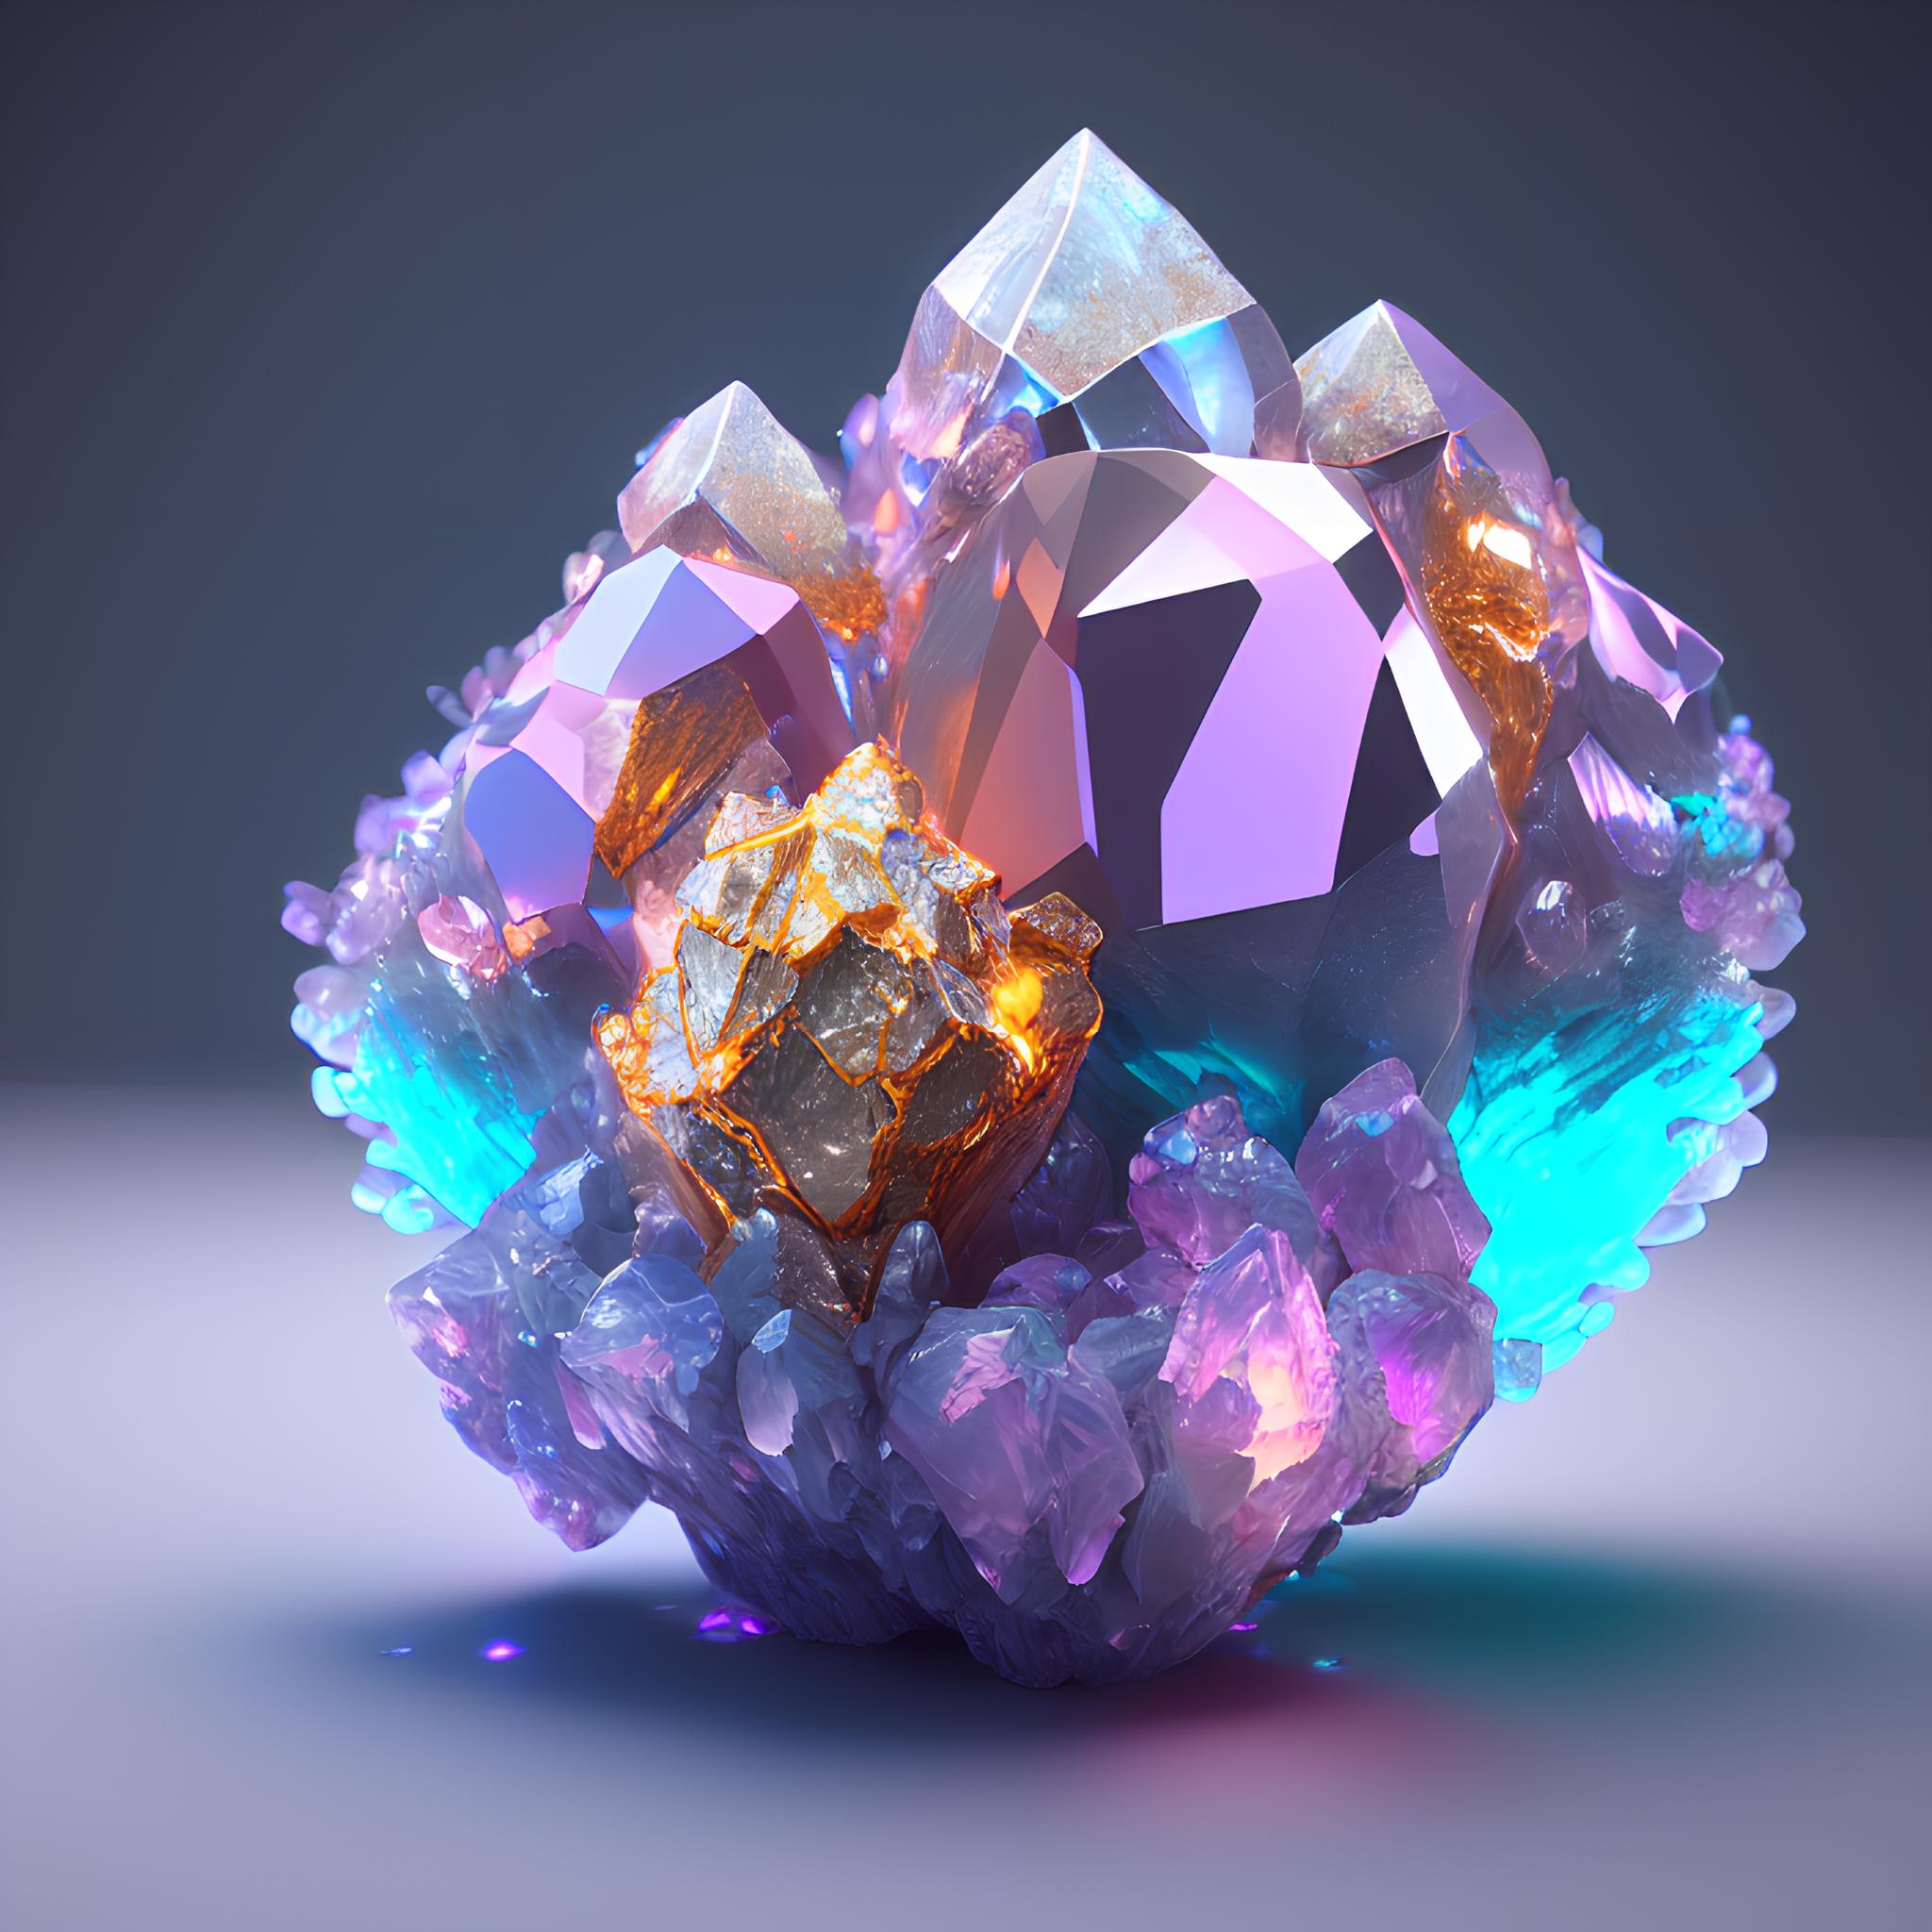 A beautiful crystal cluster with a variety of colors, including purple, blue, and orange.